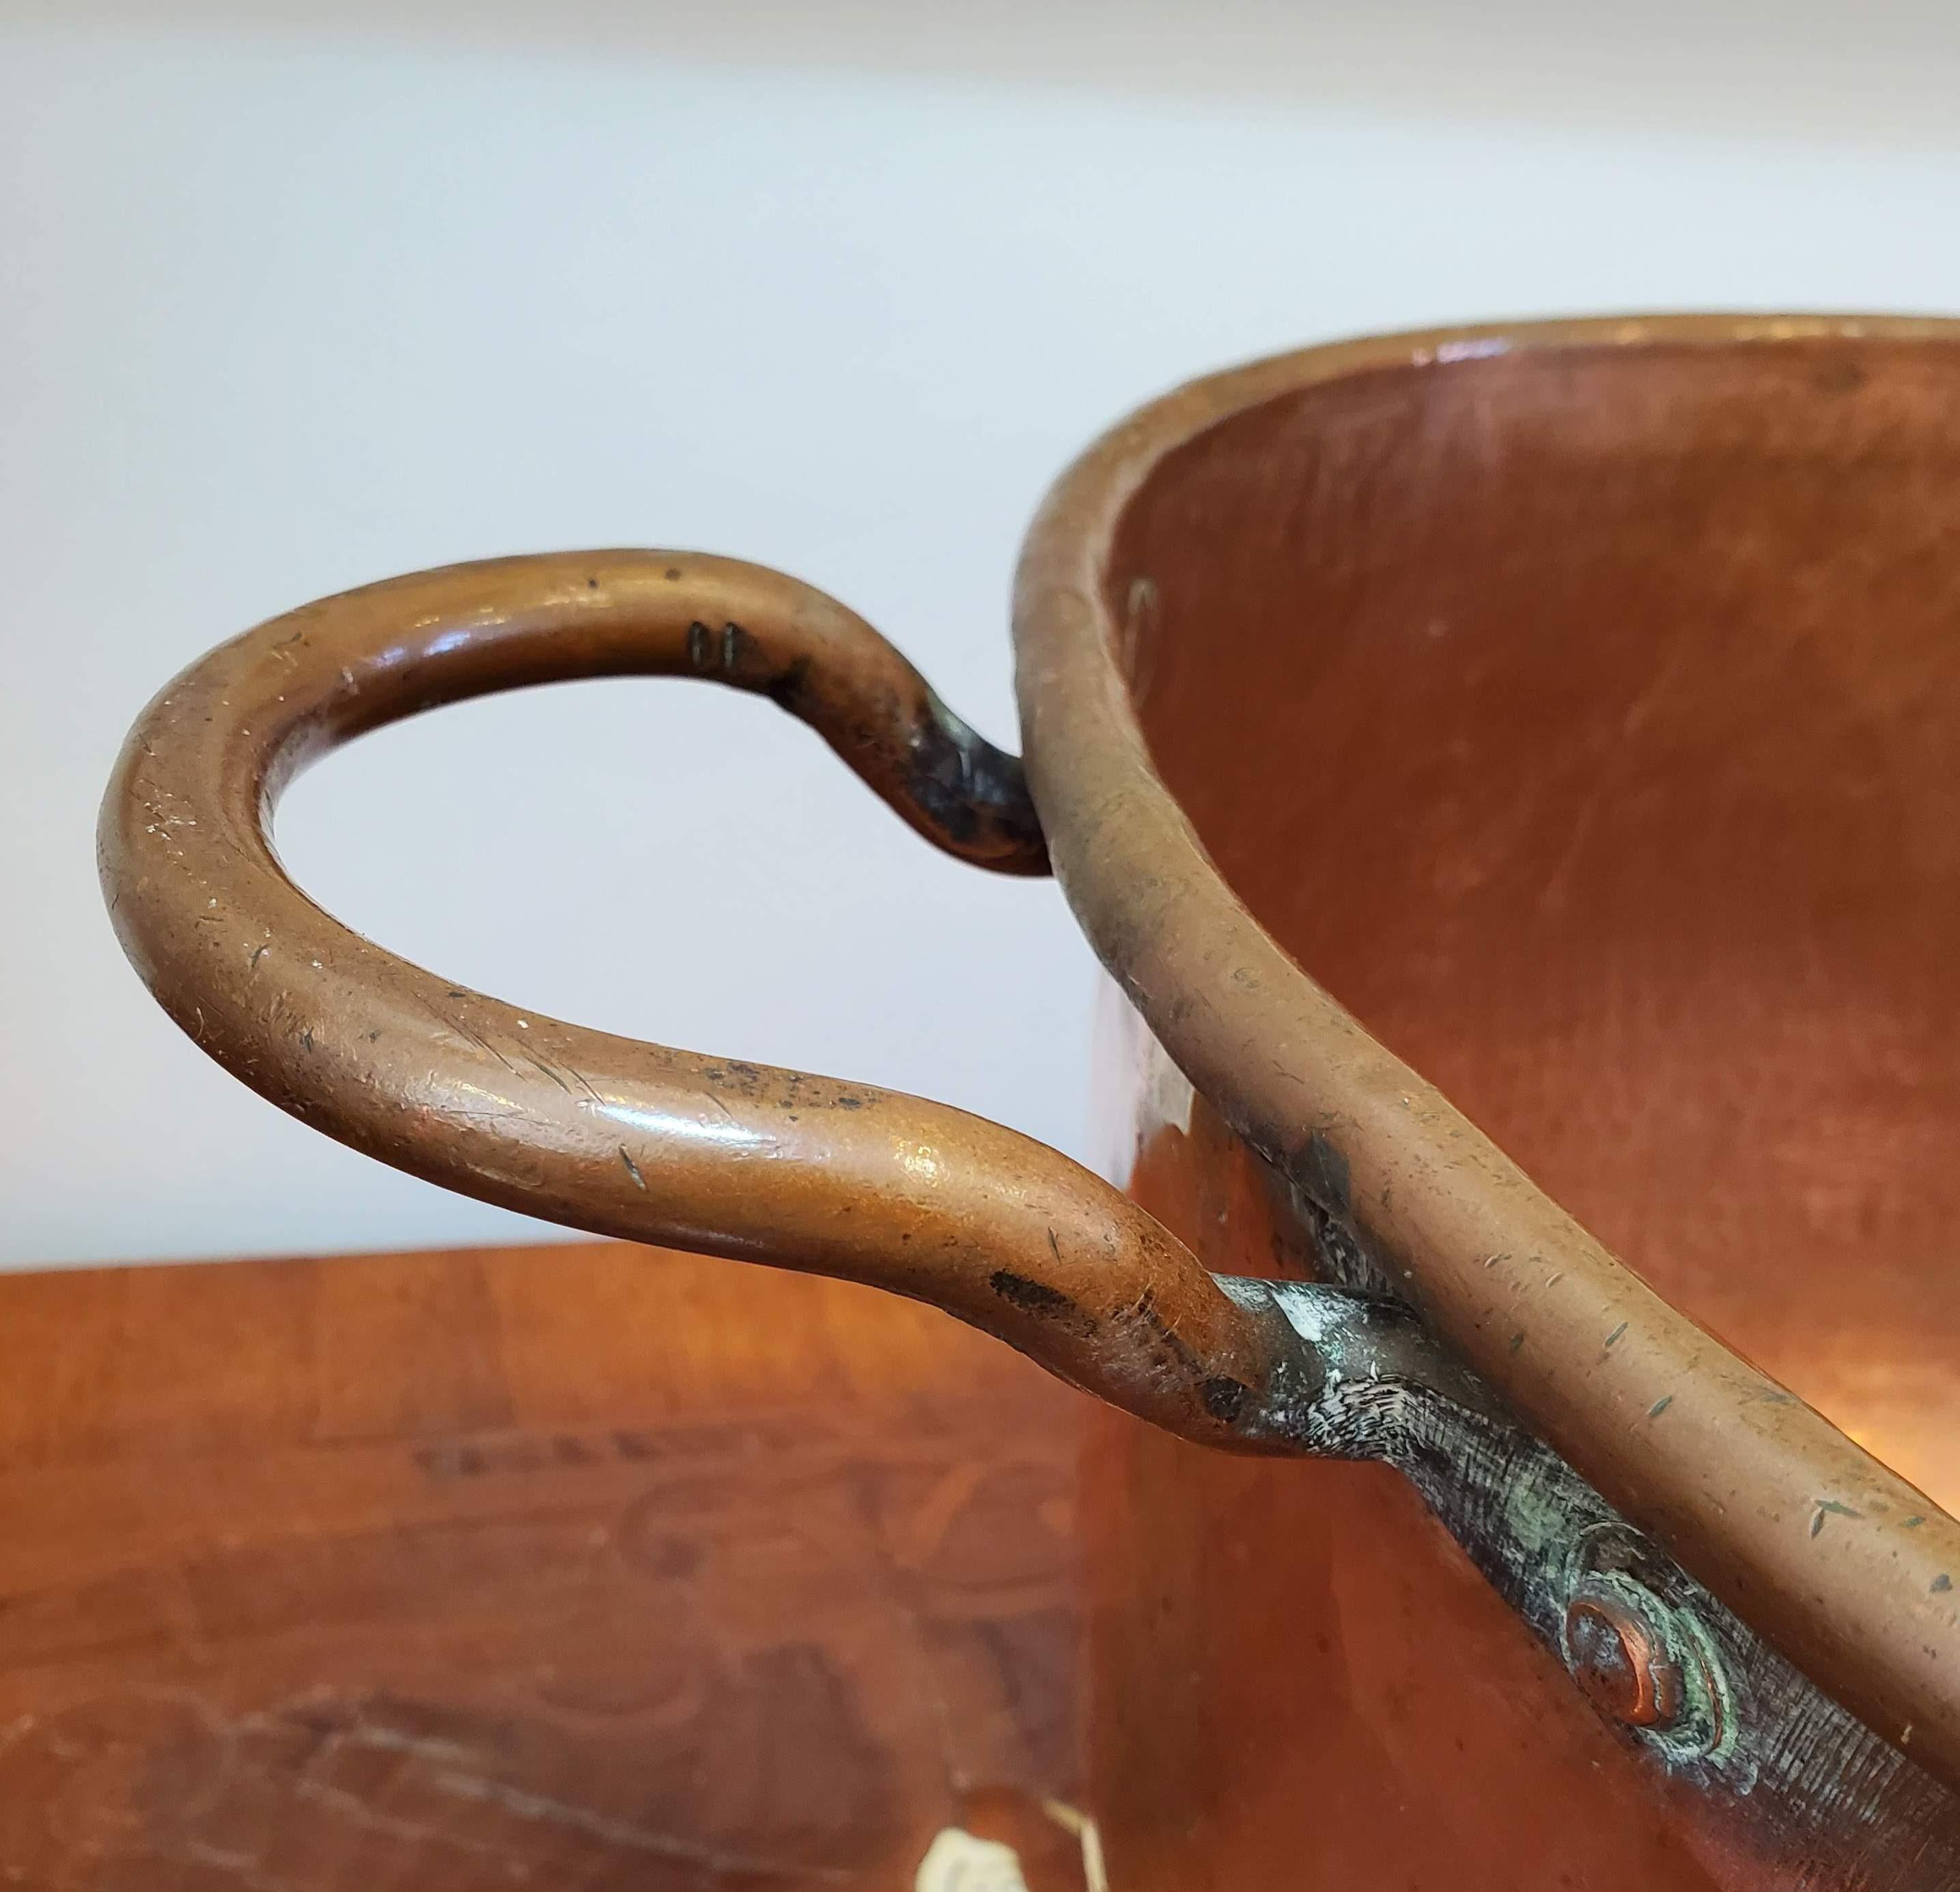 large copper pot with handles